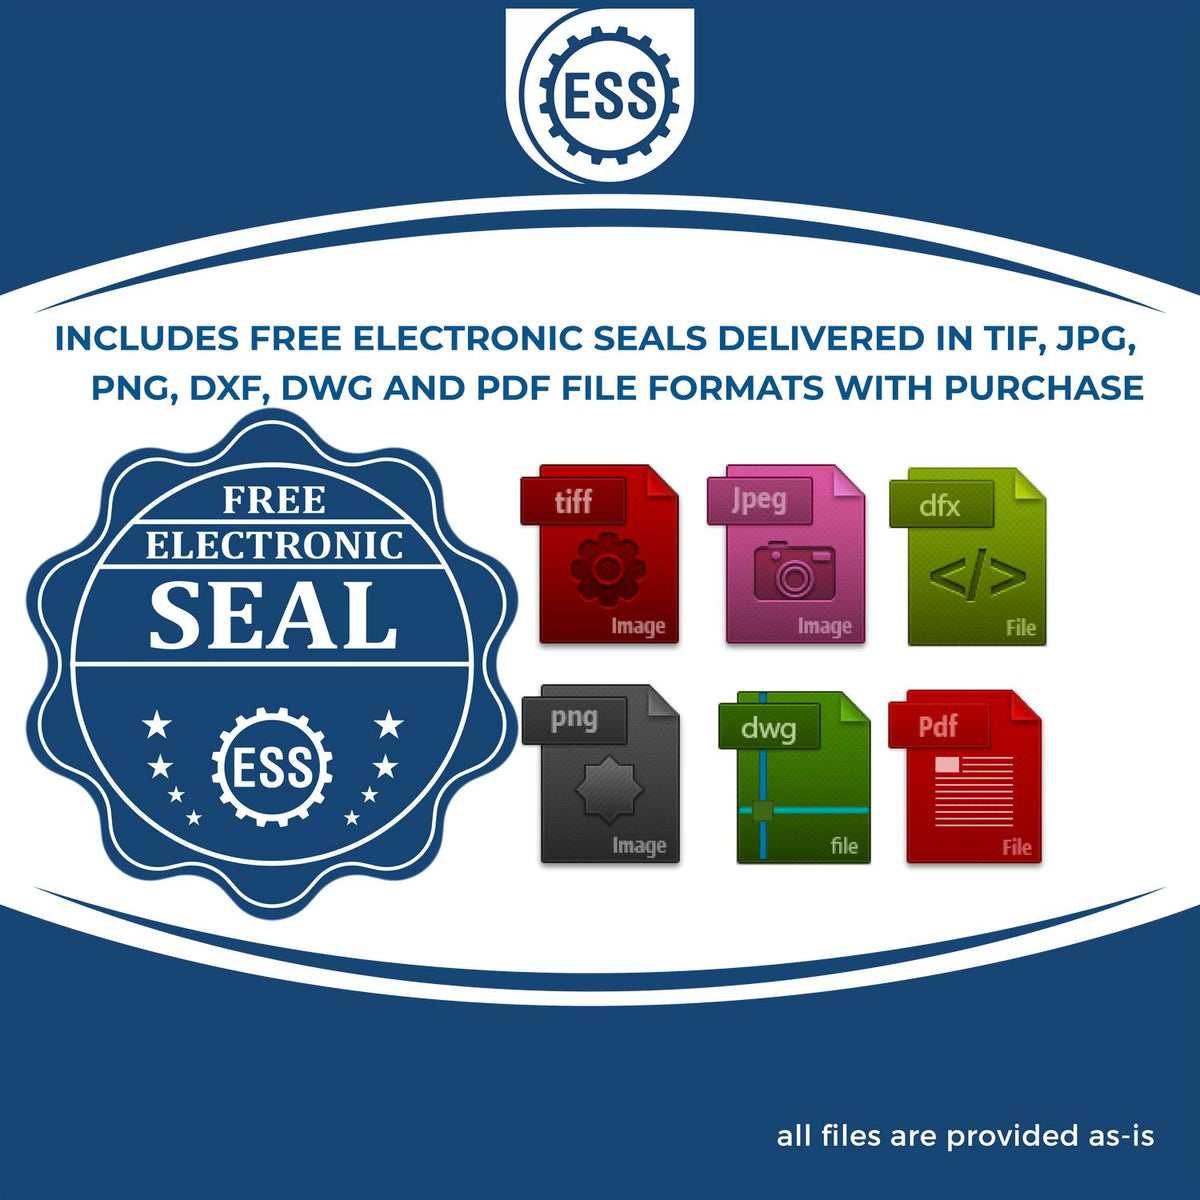 An infographic for the free electronic seal for the Long Reach Idaho PE Seal illustrating the different file type icons such as DXF, DWG, TIF, JPG and PNG.